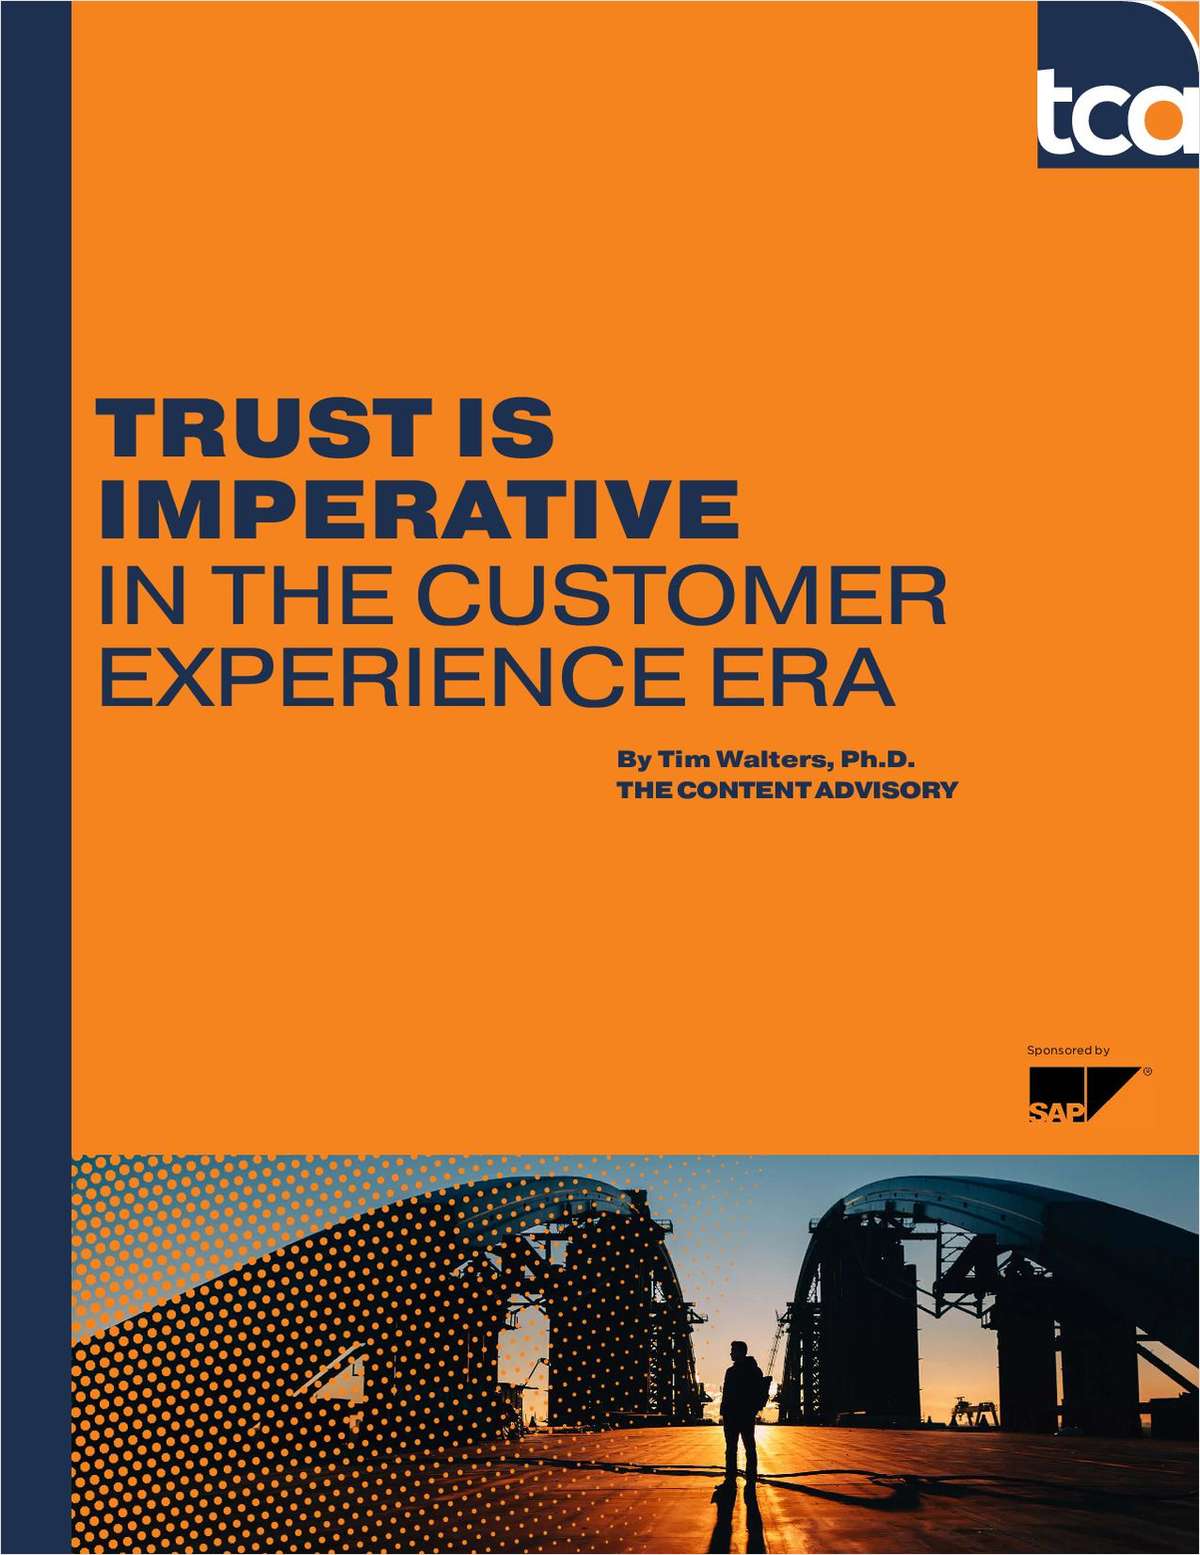 Trust is imperative in the customer experience era